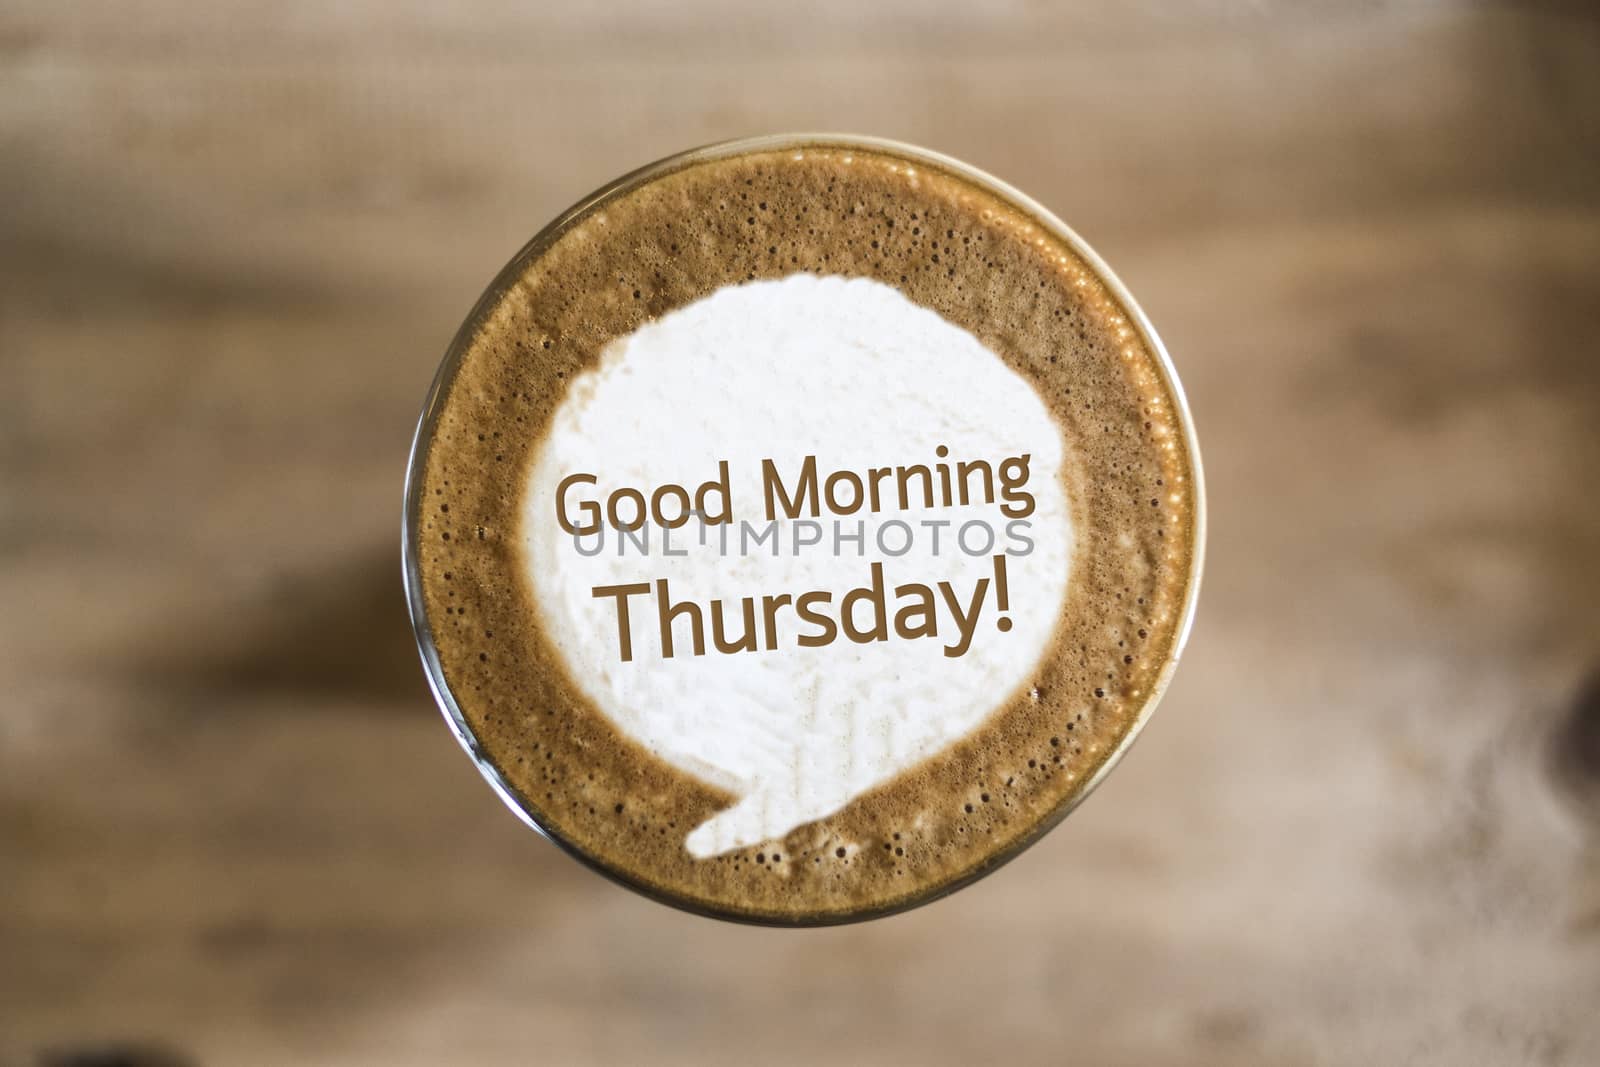 Good Morning Thursday on Coffee latte art concept by 2nix